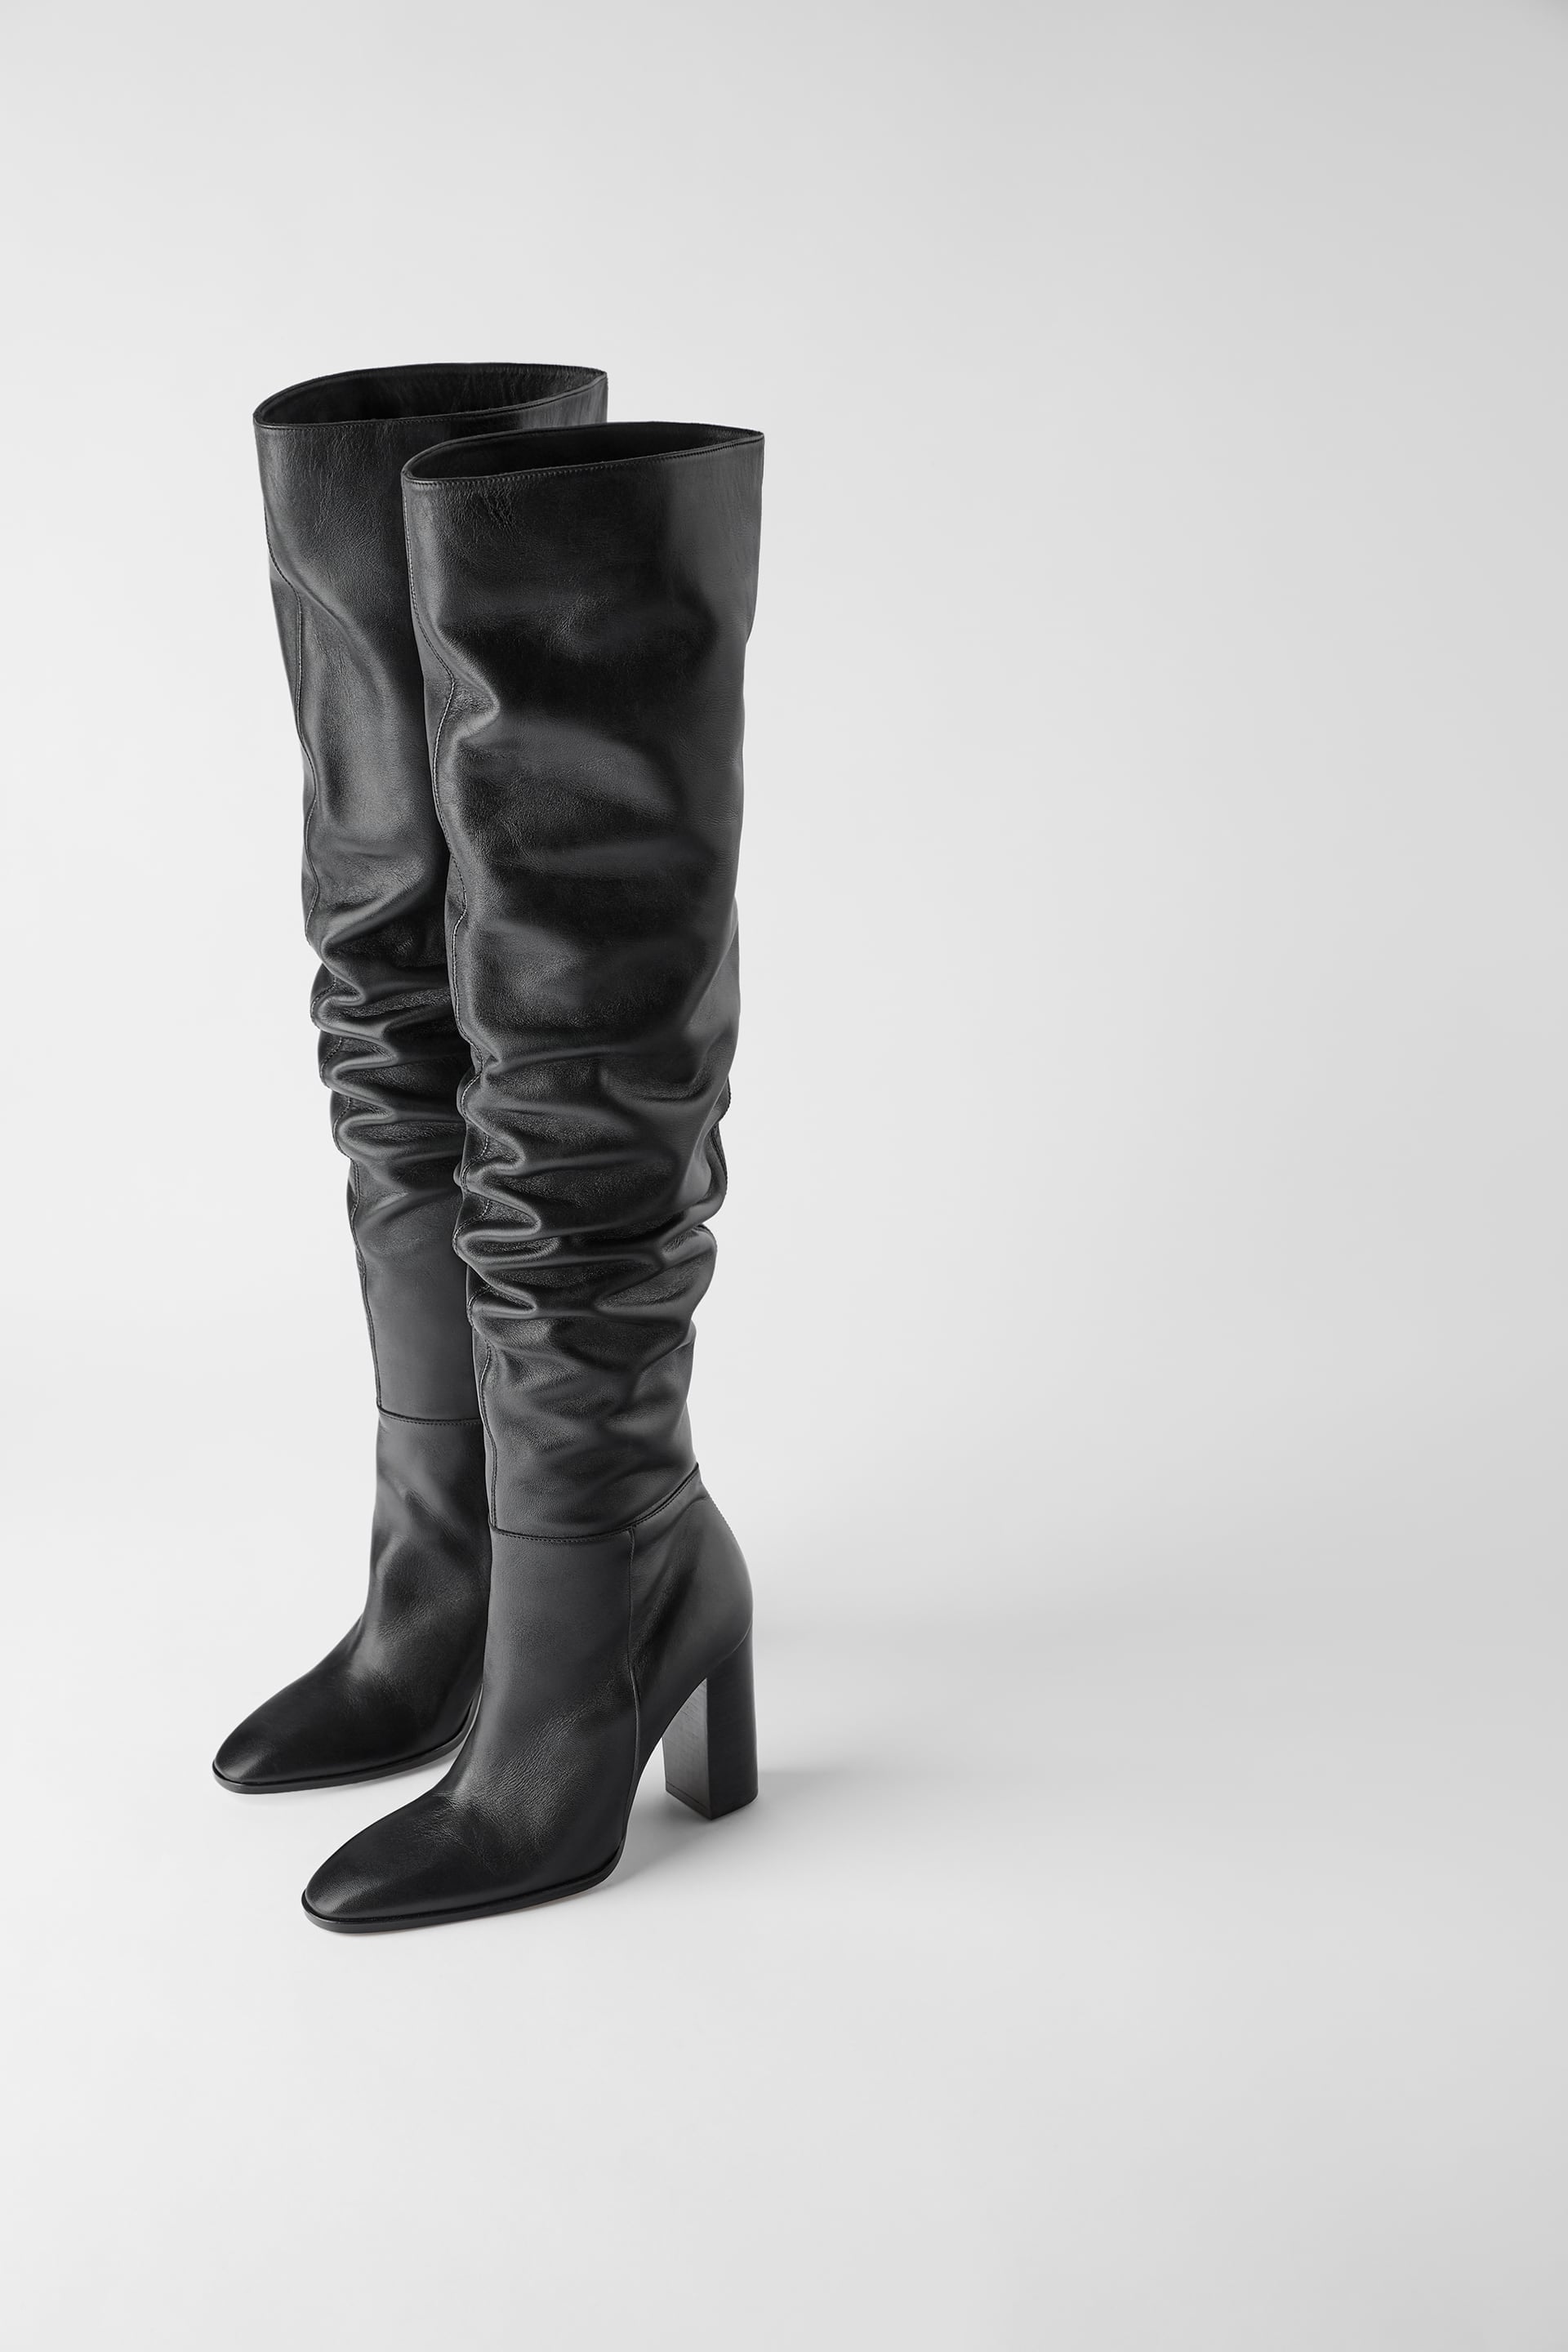 Zara Over The Knee Heeled Leather Boots 